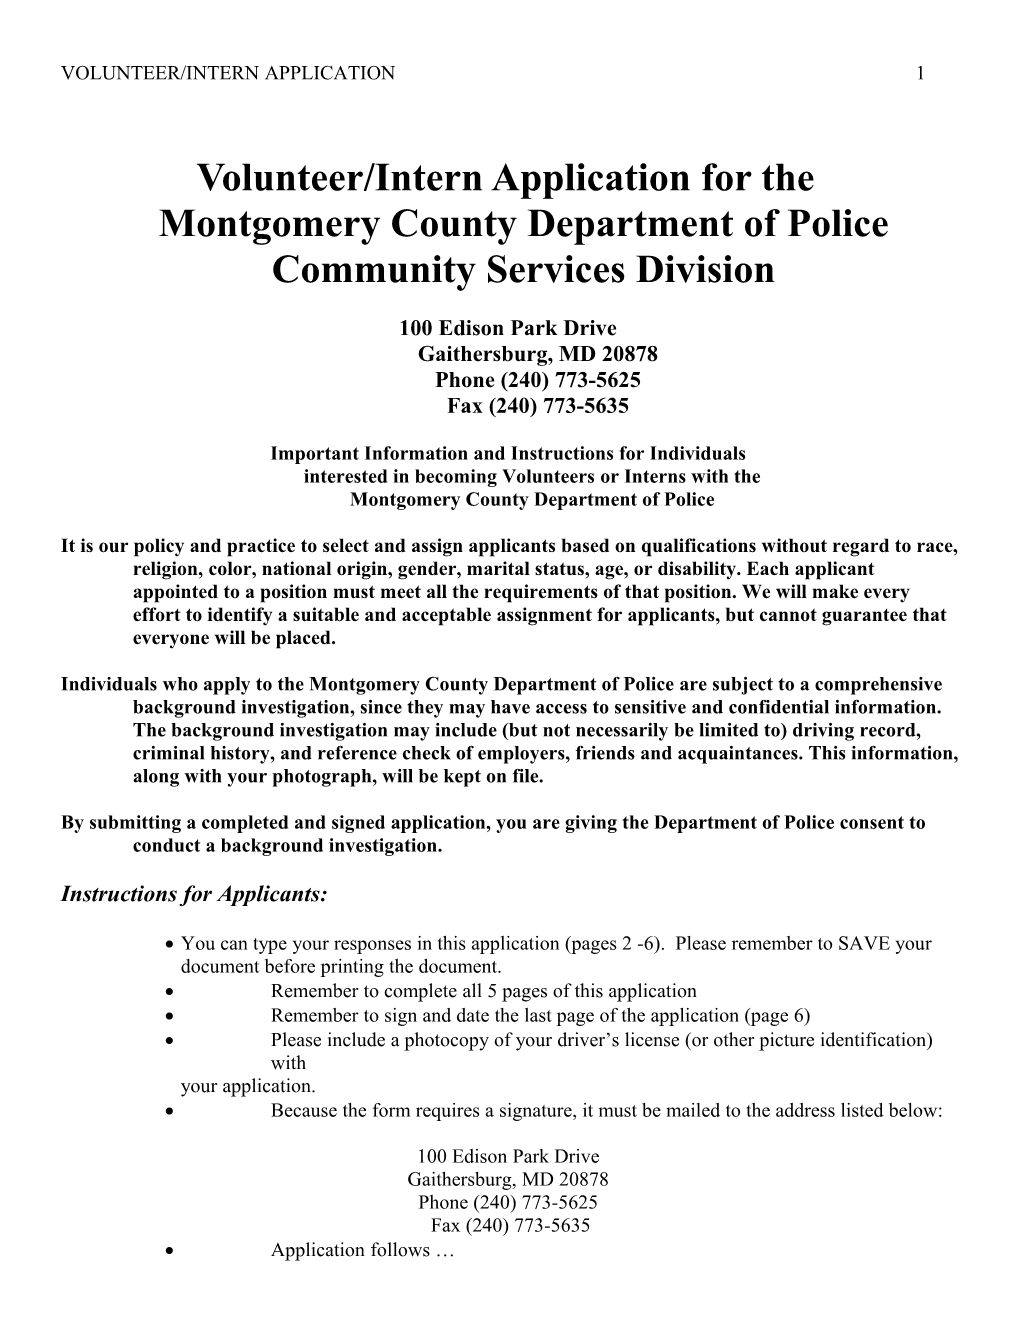 Volunteer/Intern Application for The